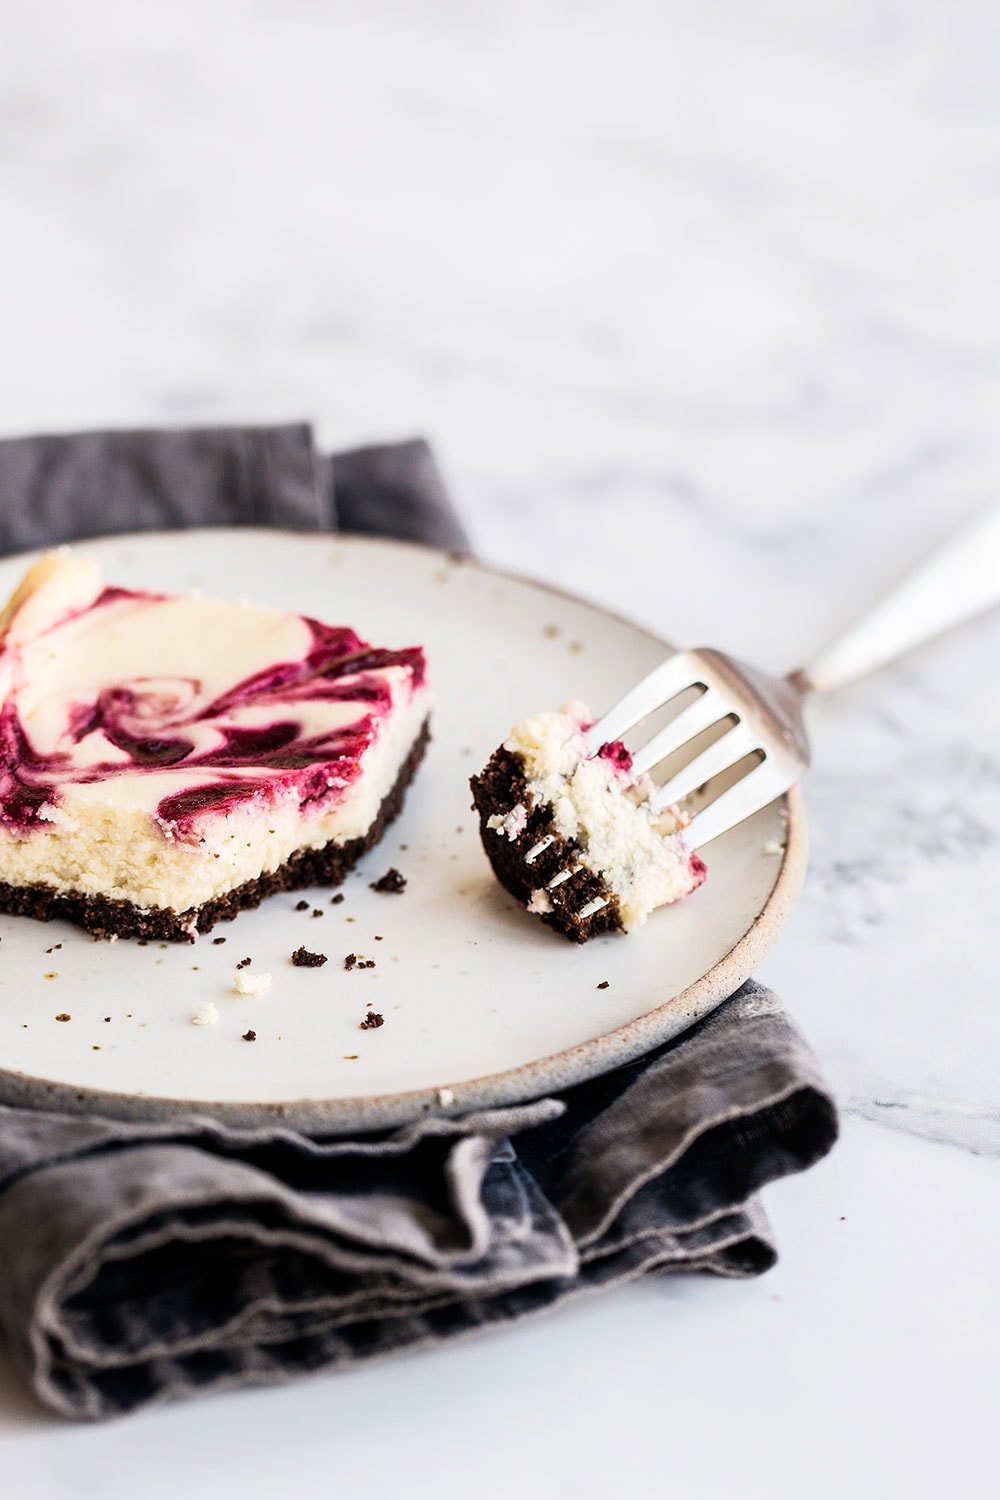 Cranberry Swirl Cheesecake Bars are tangy, sweet, fresh, and rich. They look almost as good as they taste!